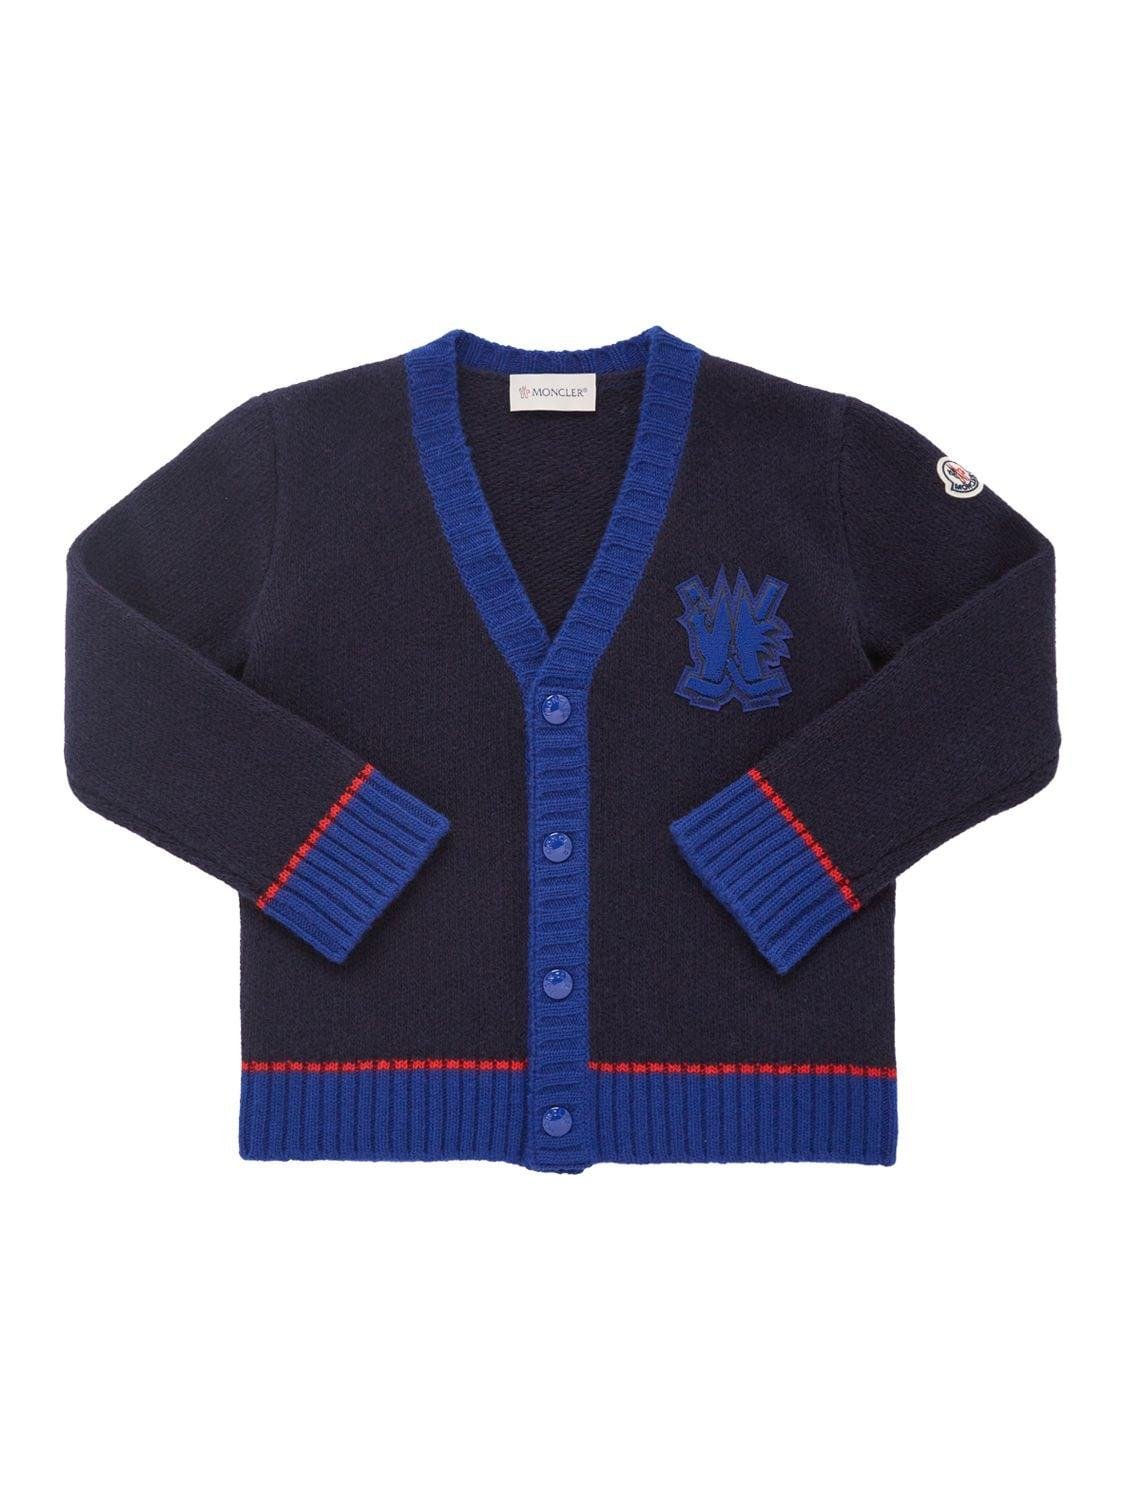 Carded Wool Cardigan by MONCLER